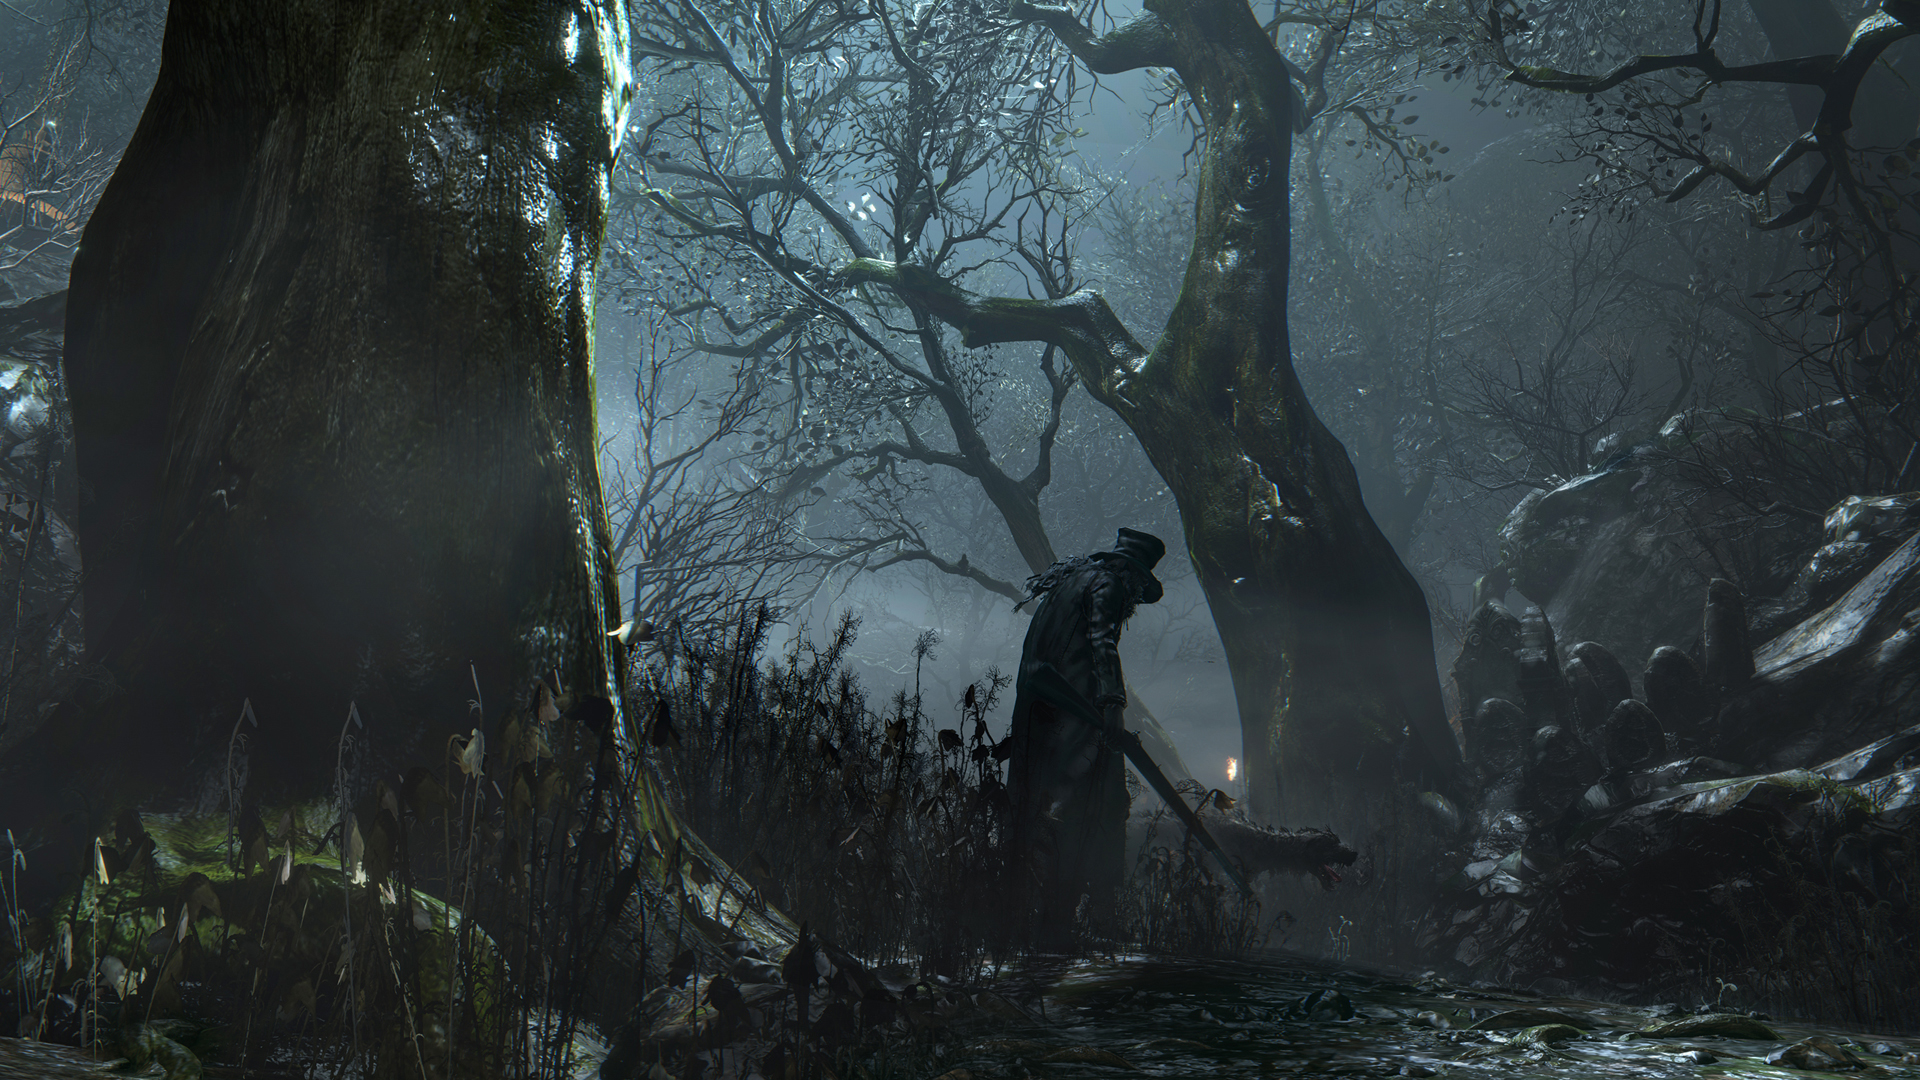 bloodborne, video game images